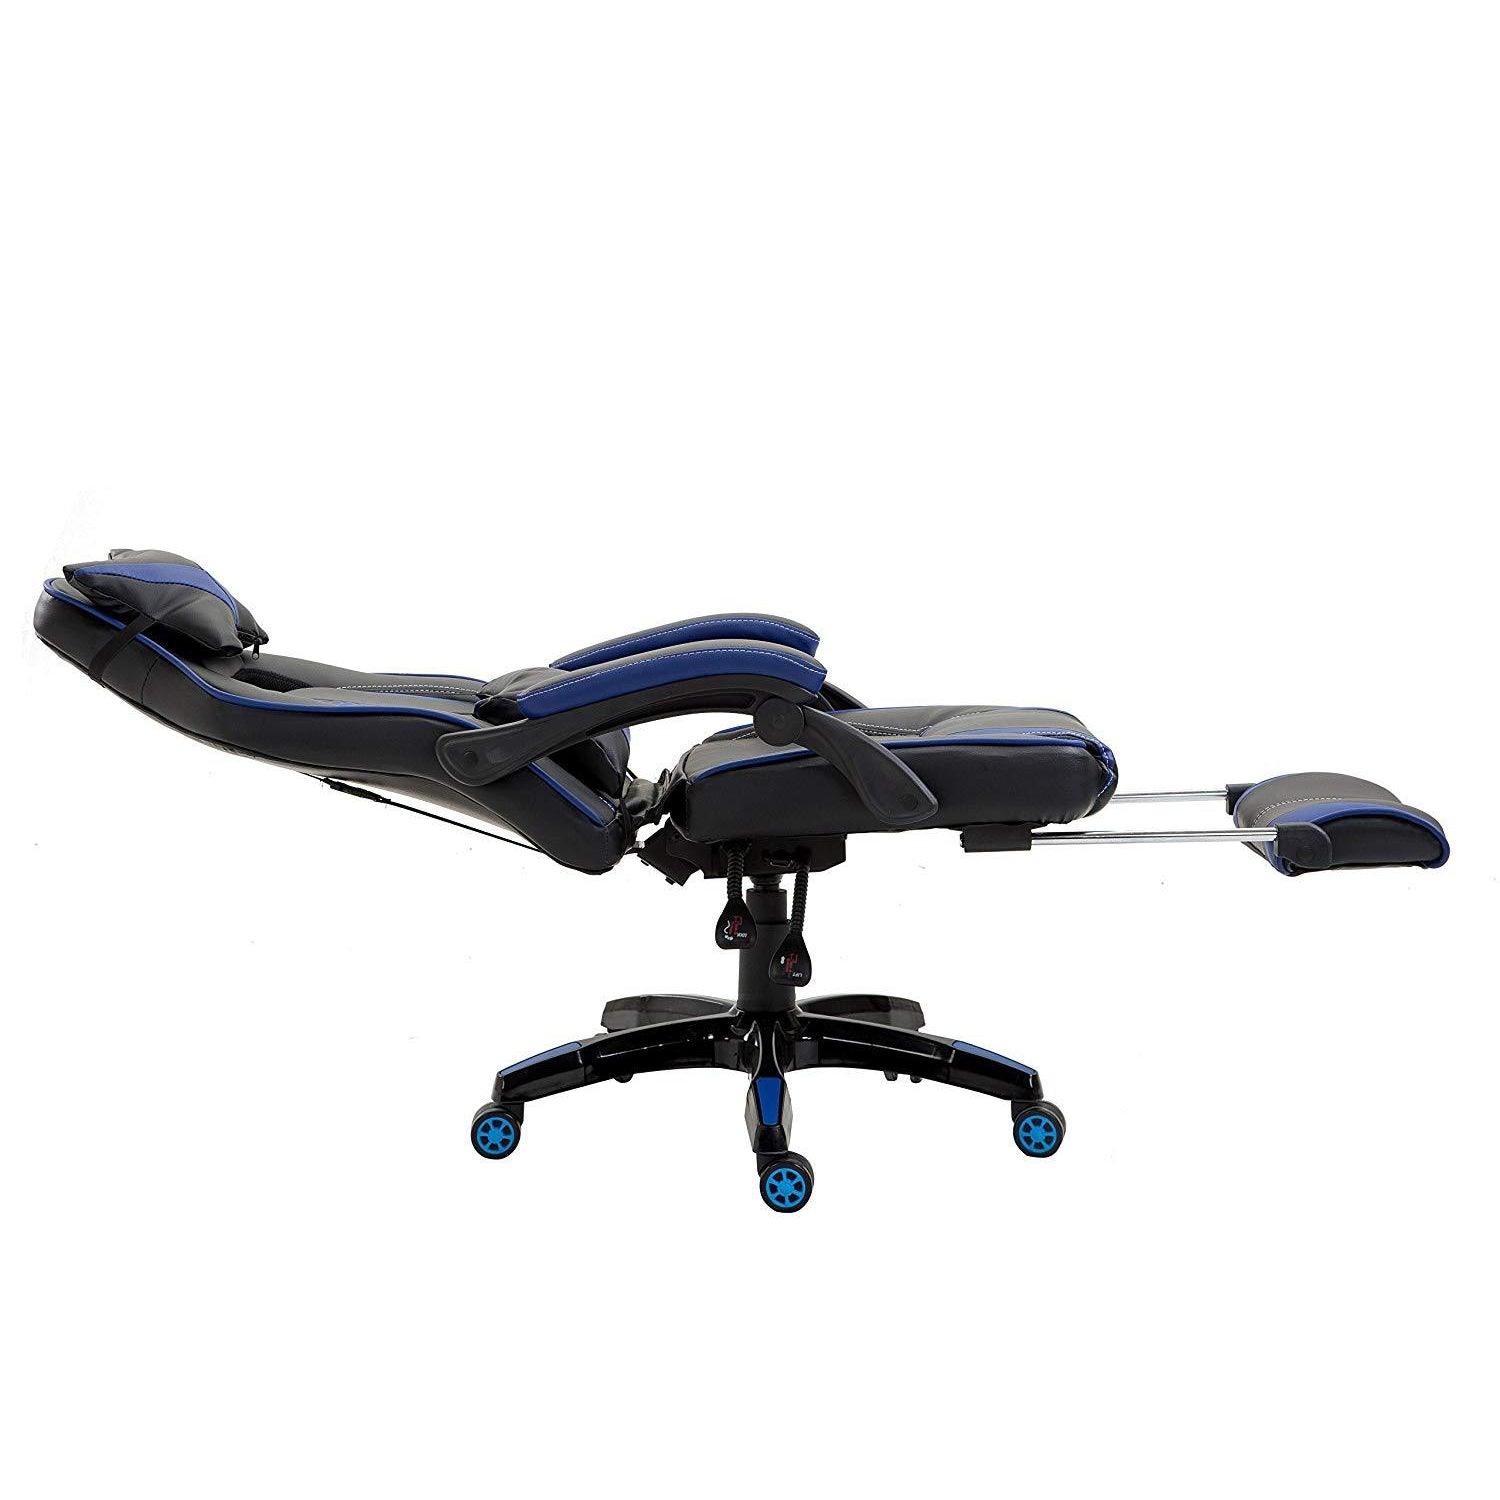 High Back Recliner Gaming Swivel Chair with Footrest & Adjustable Lumbar & Head Cushion, MR49 Black & Blue